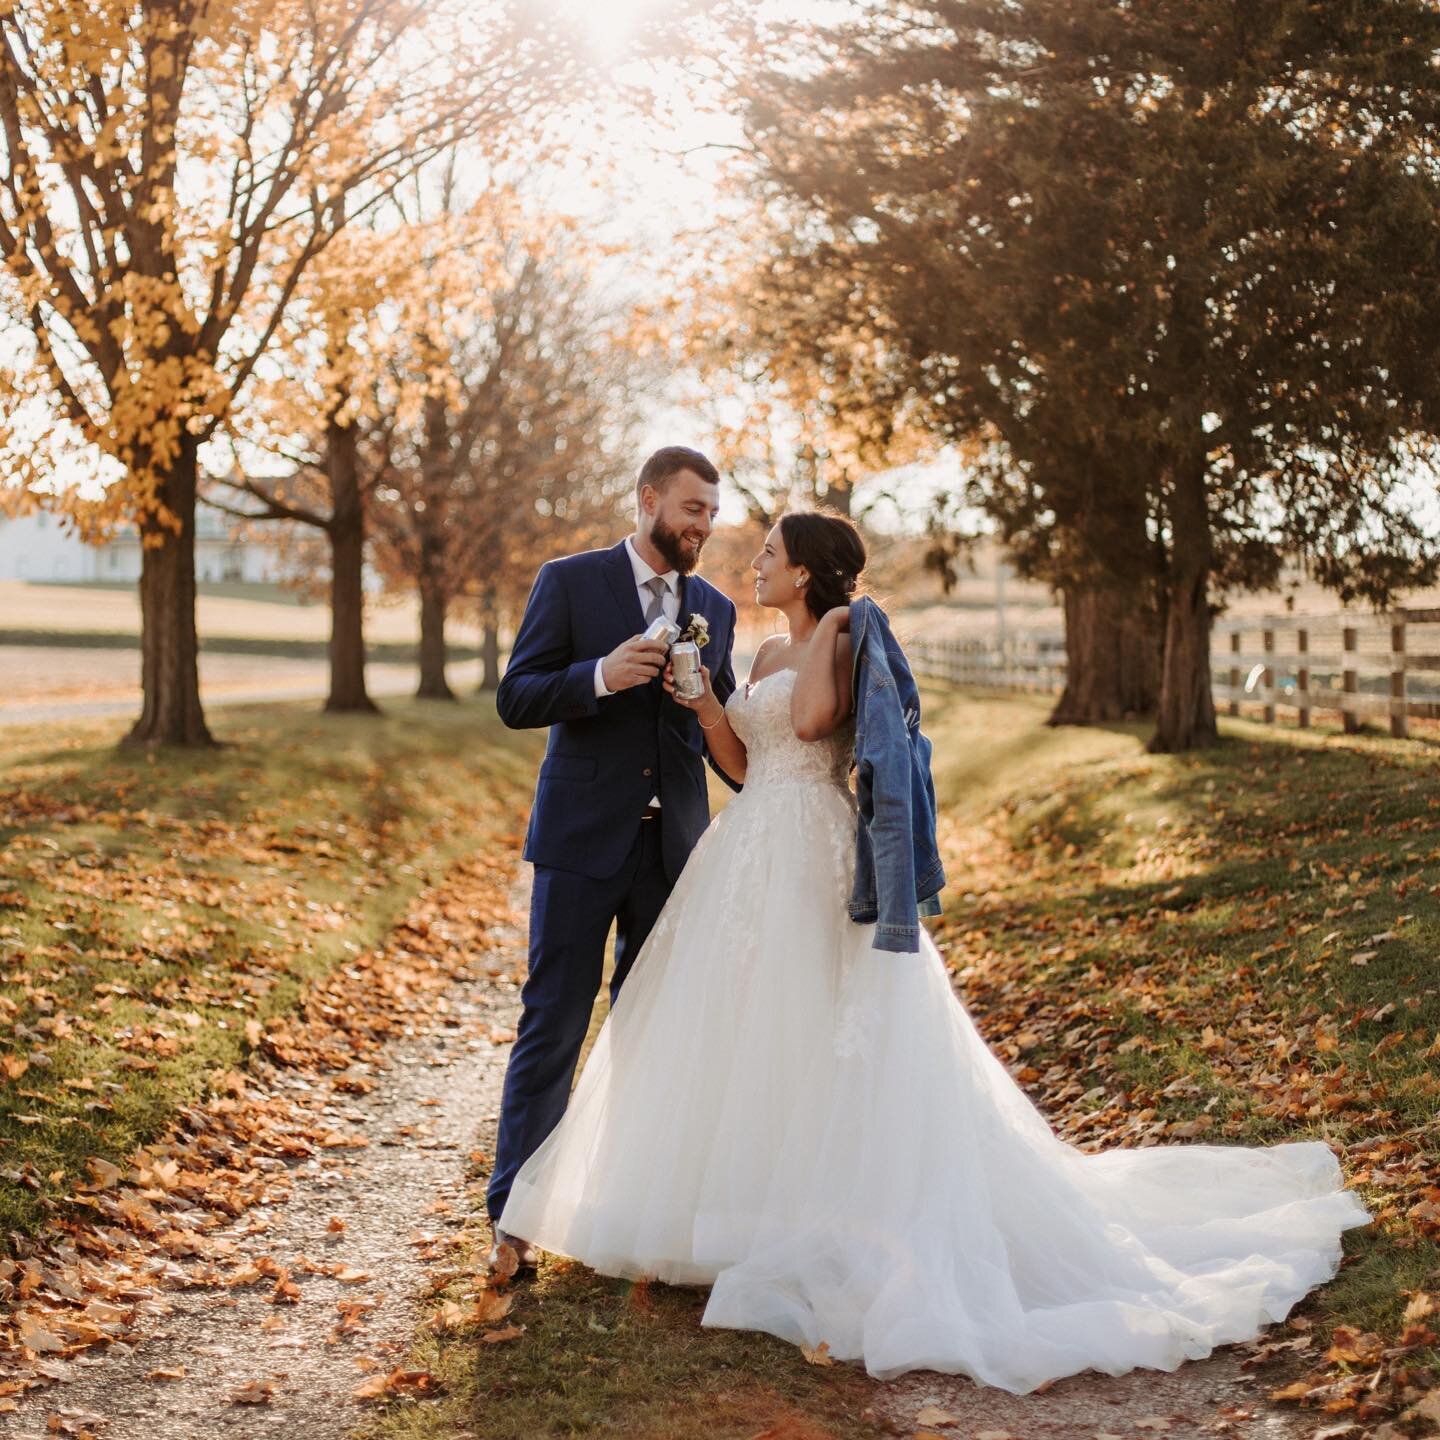 These two had a change of plans for their wedding day which brought them to their stunning farm property. Cheers to that.